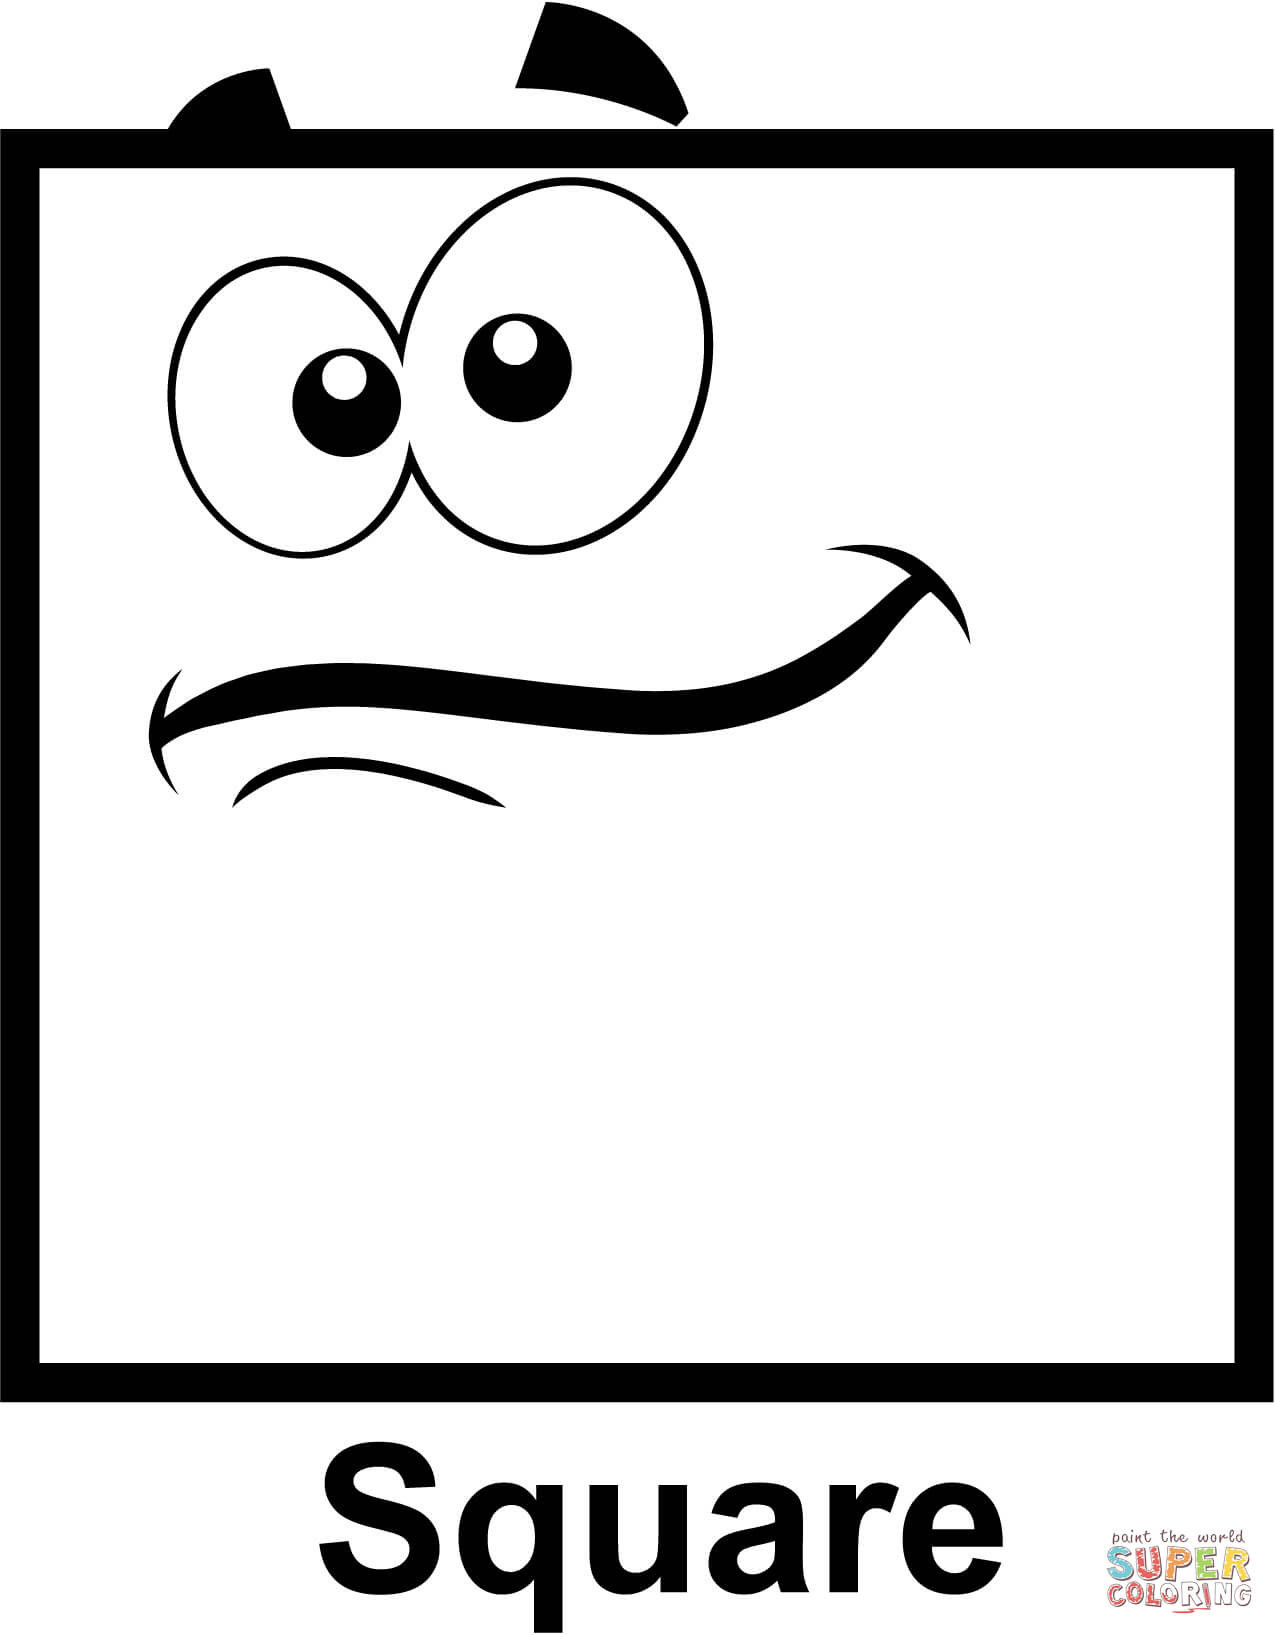 Square Coloring Pages
 Square with Cartoon Face coloring page